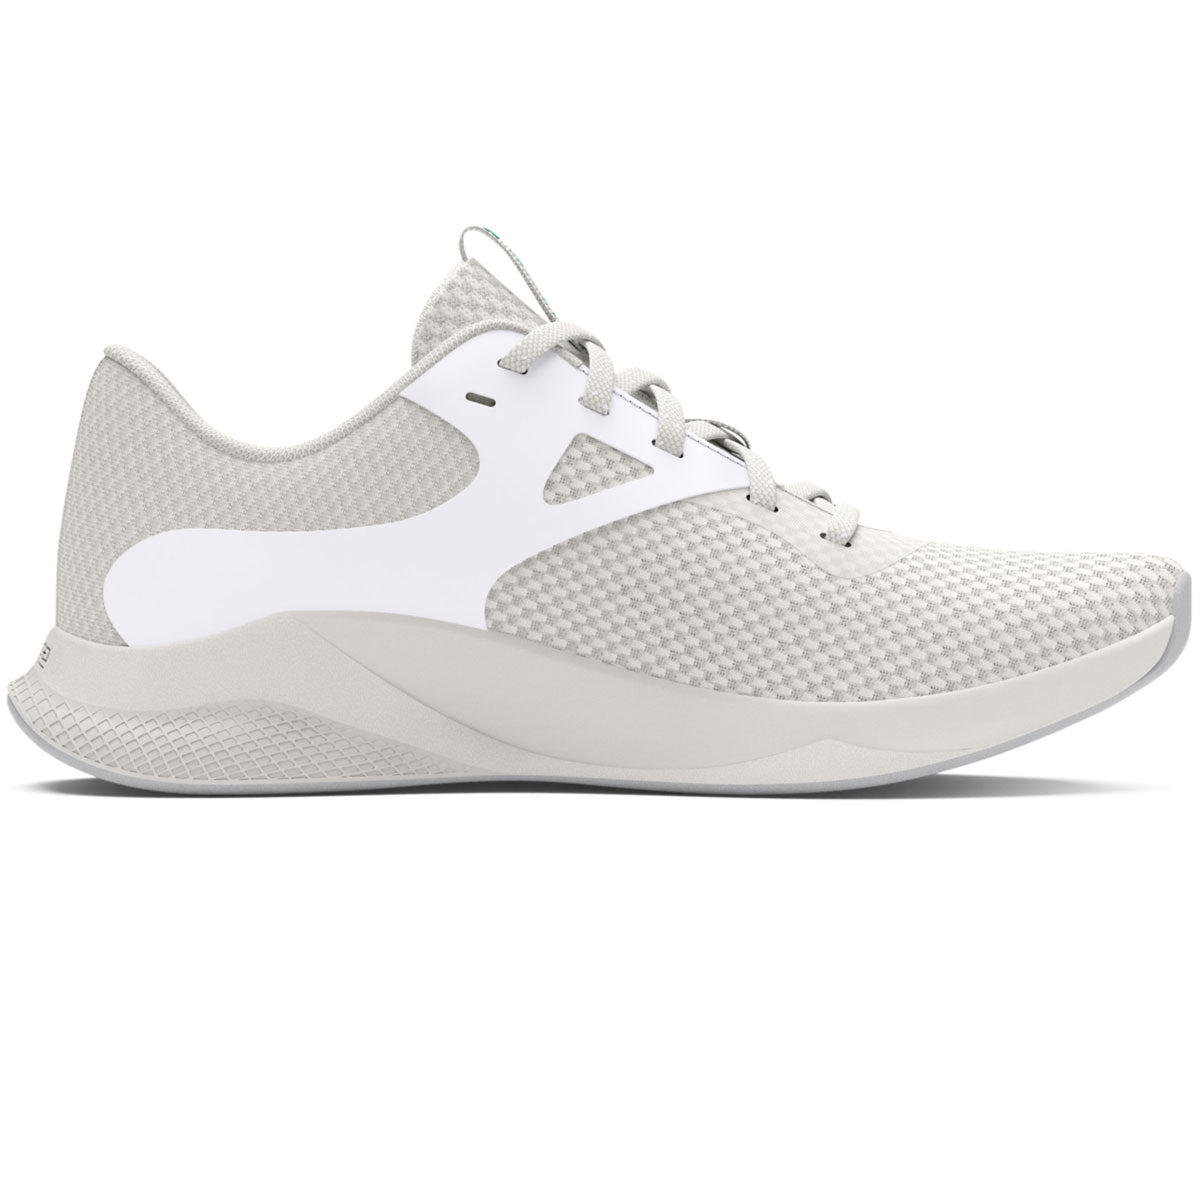 Under Armour Charged Aurora 2 Training Shoes - Womens - White/Clay/Radial Turquoise